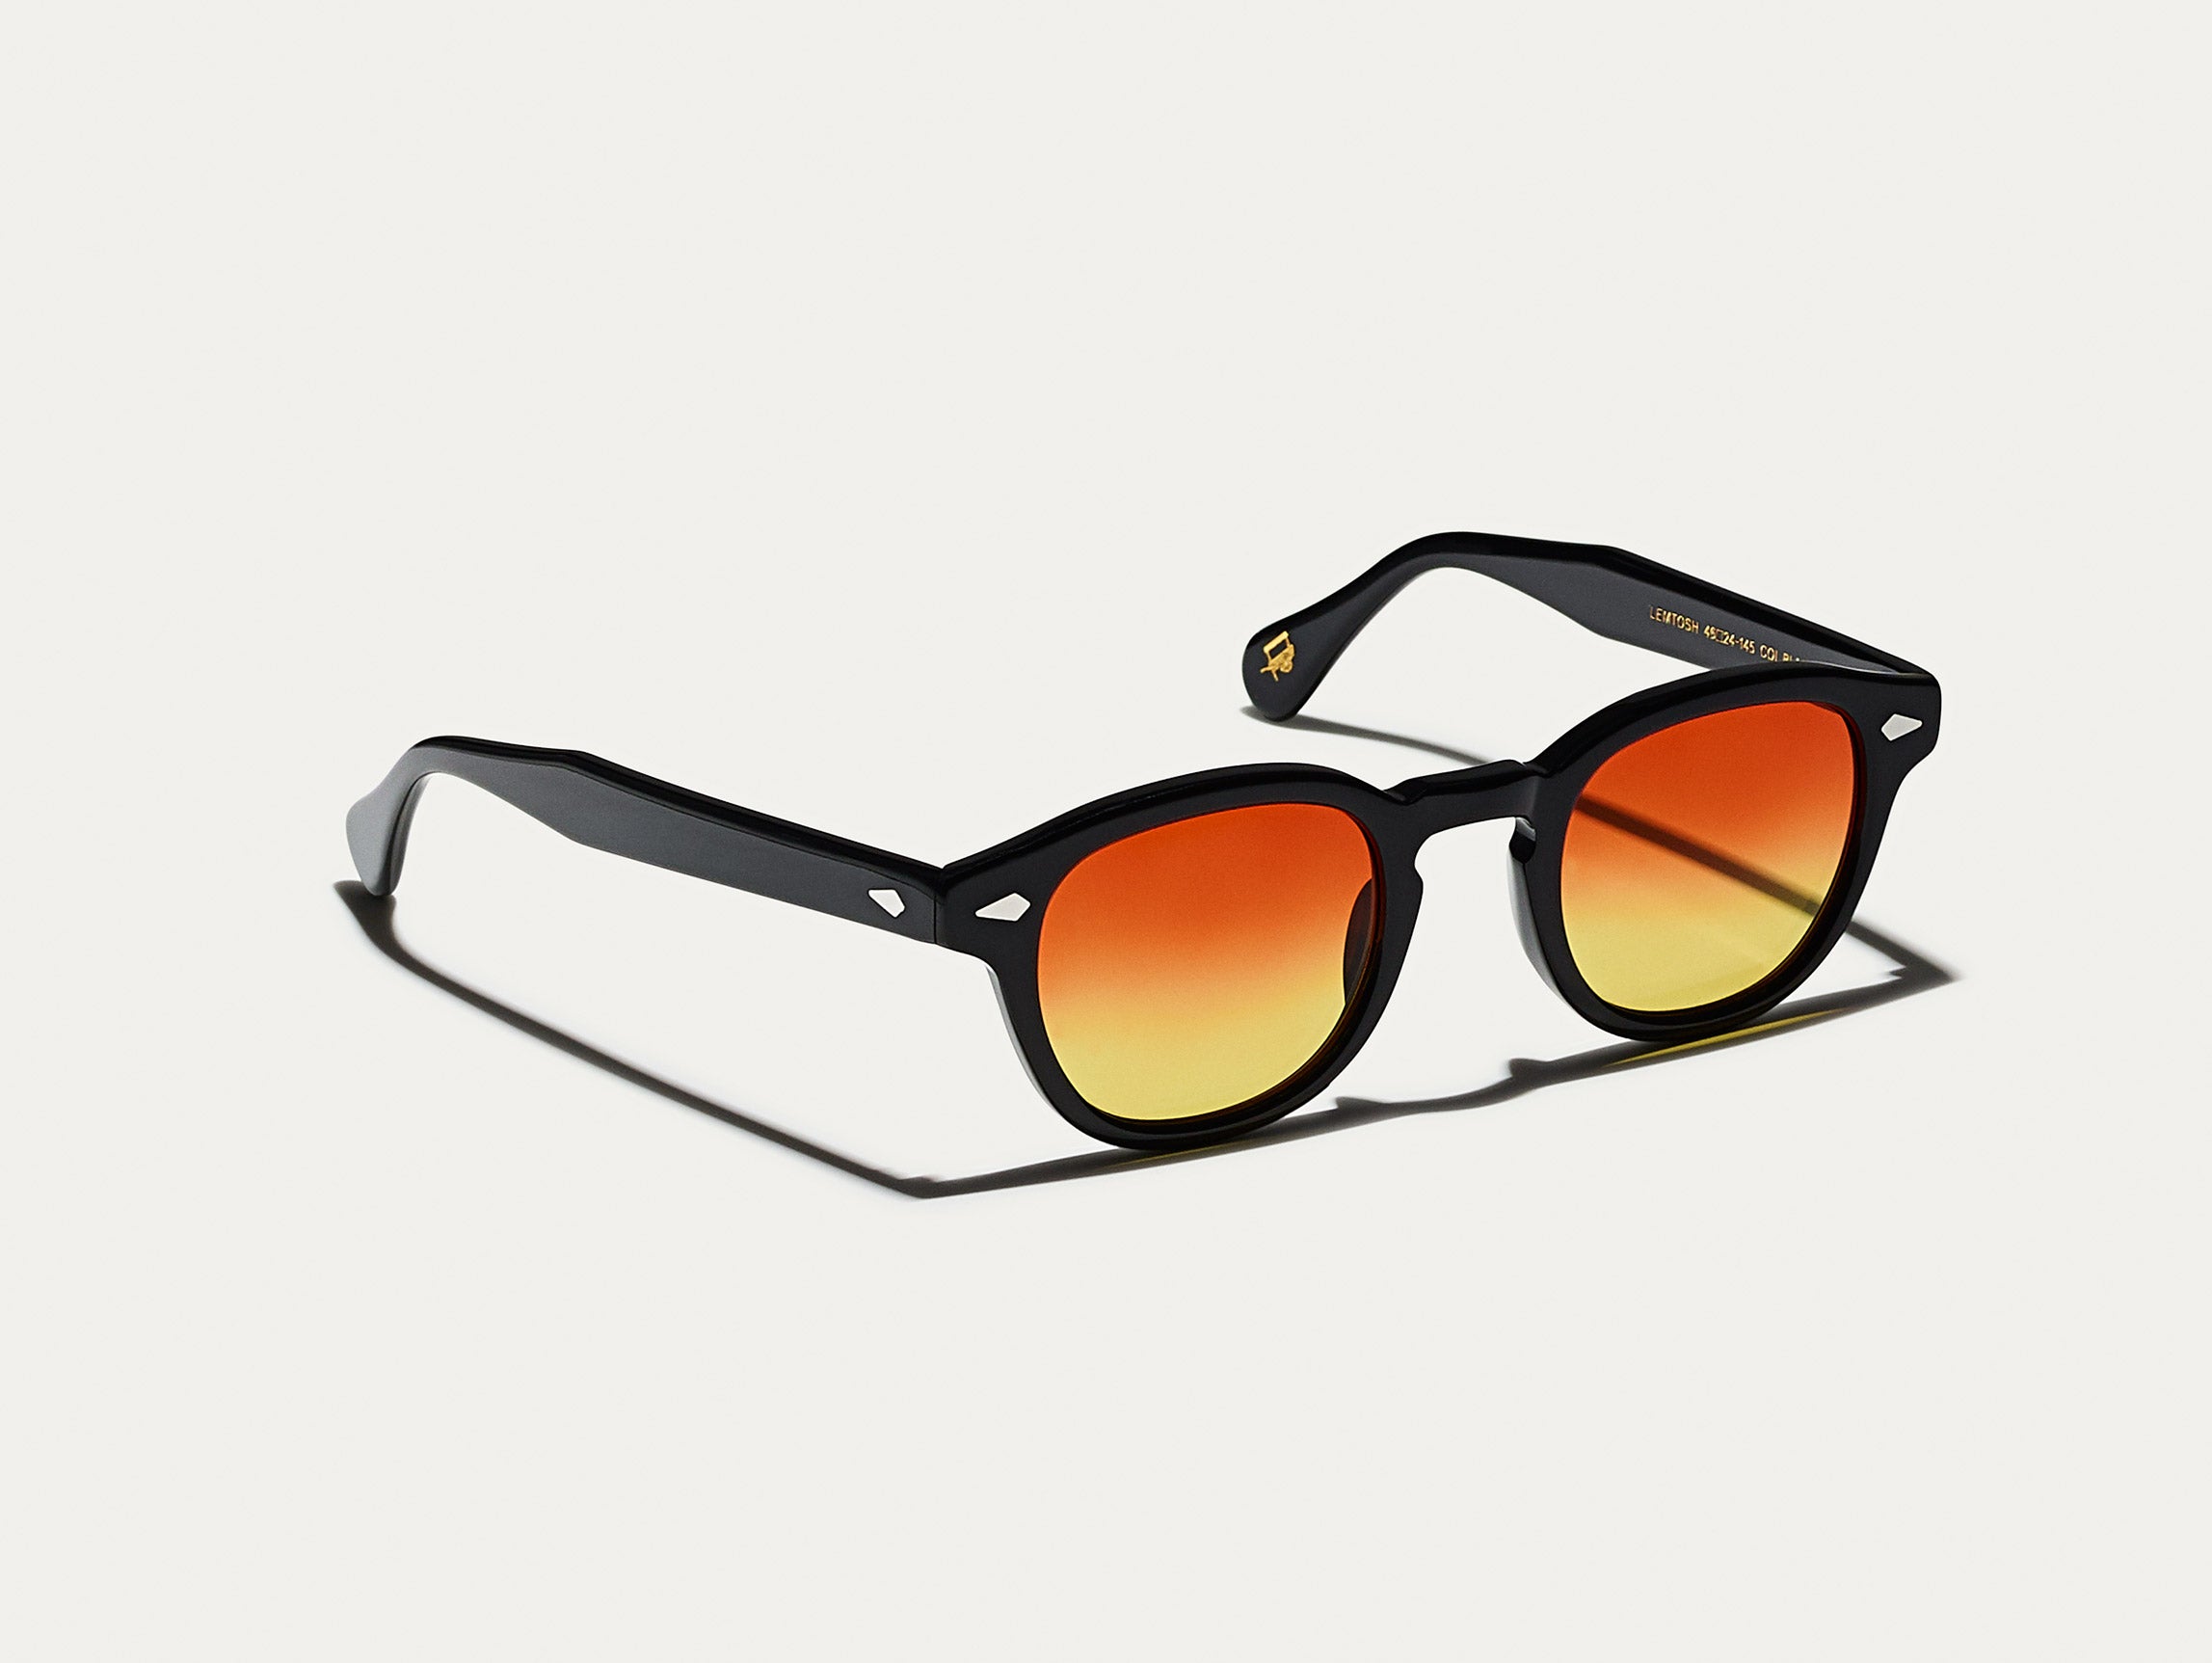 #color_candy corn | The LEMTOSH Black with Candy Corn Tinted Lenses